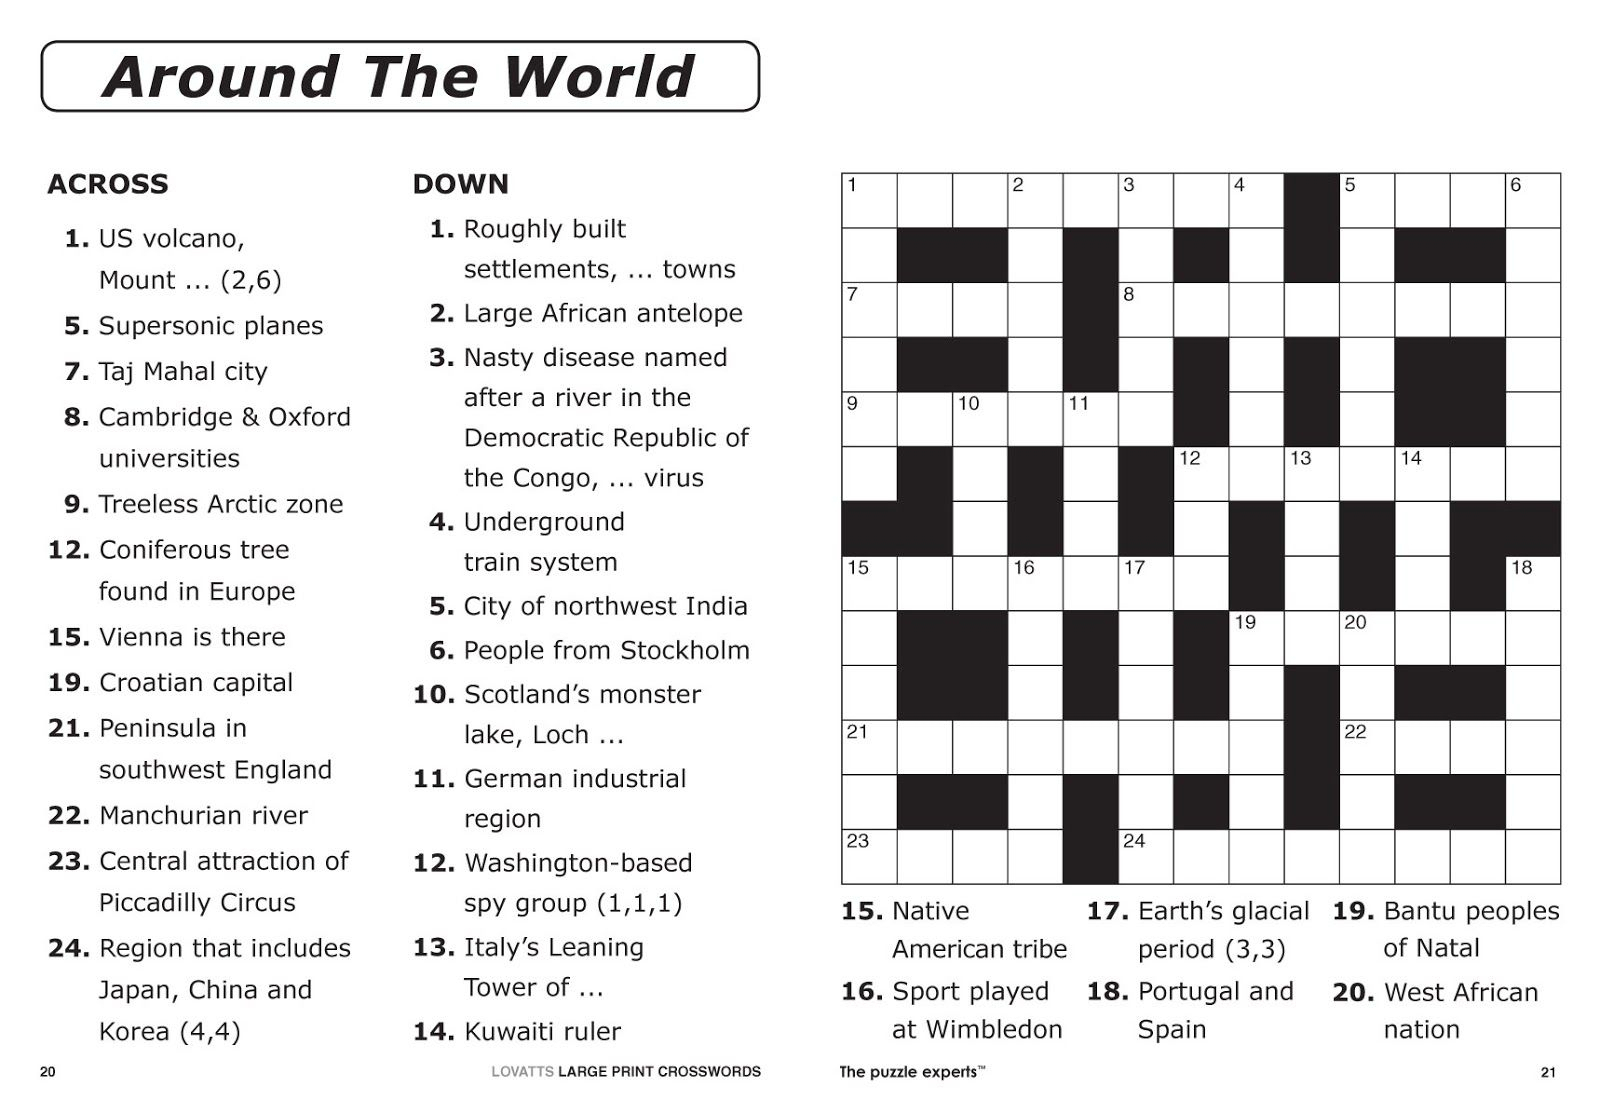 Free Printable Large Print Crossword Puzzles | M3U8 - Printable Puzzles For 9 Year Olds